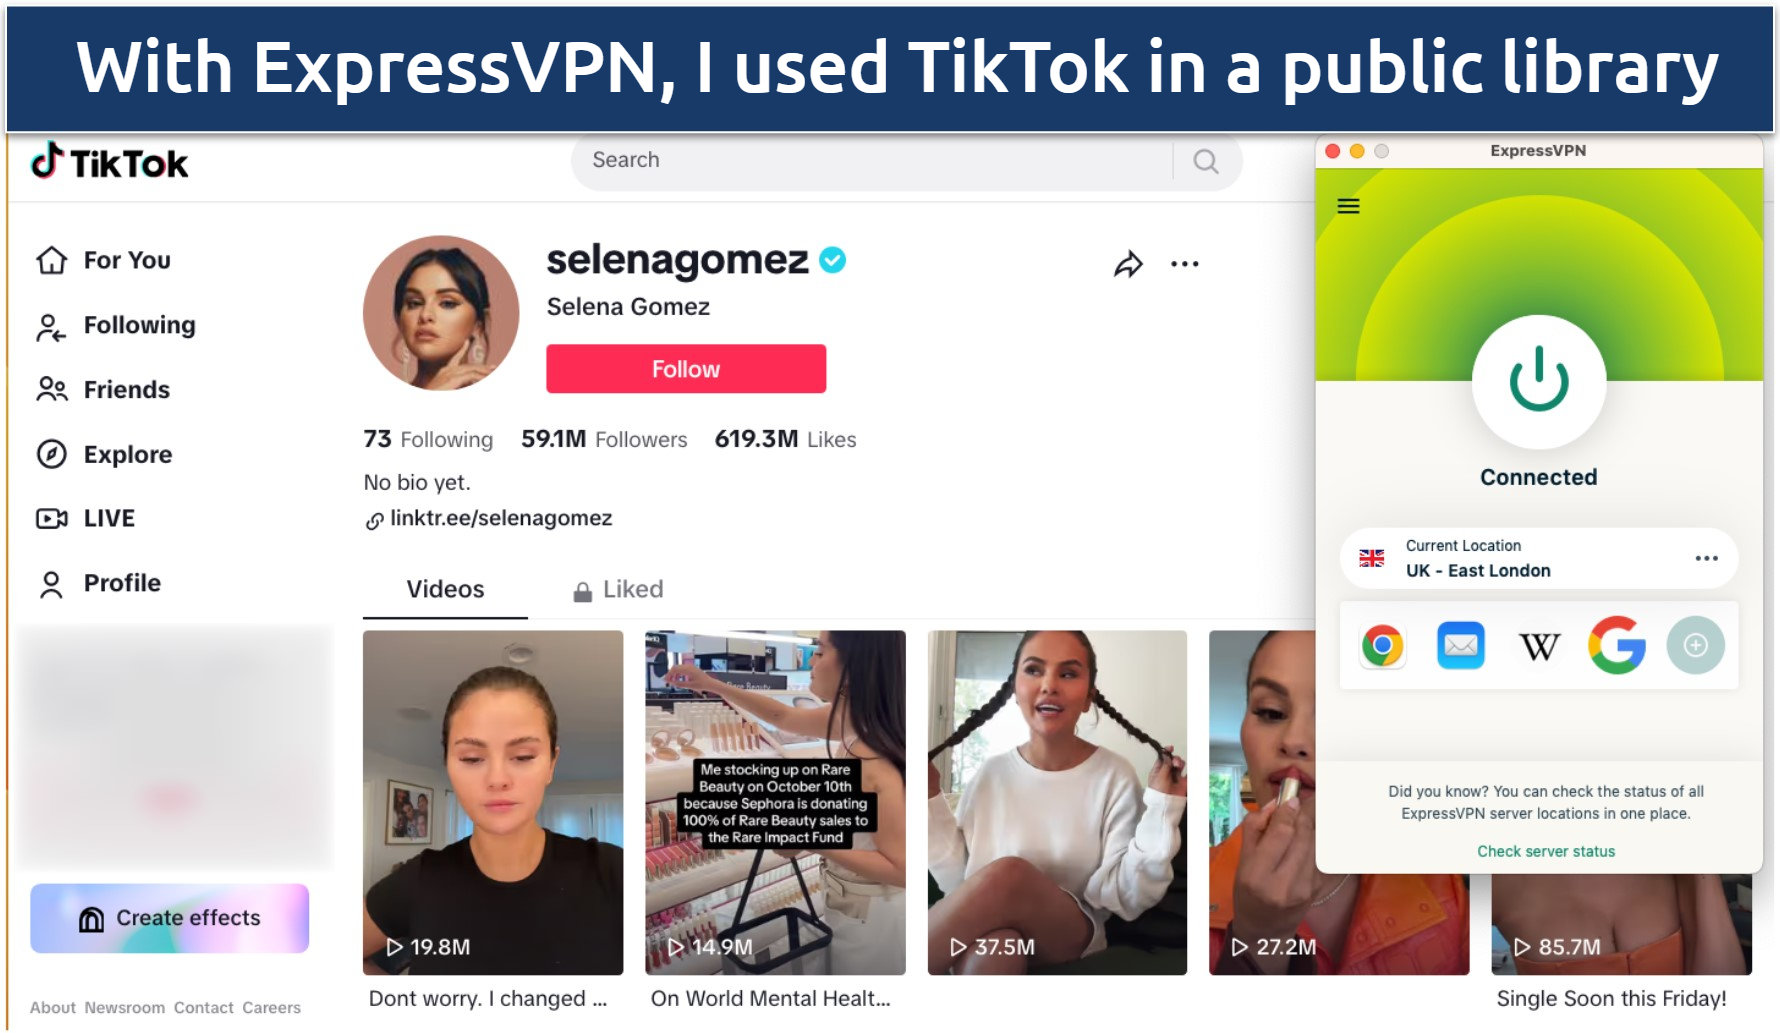 Screenshot of the TikTok app working with ExpressVPN on a restricted network